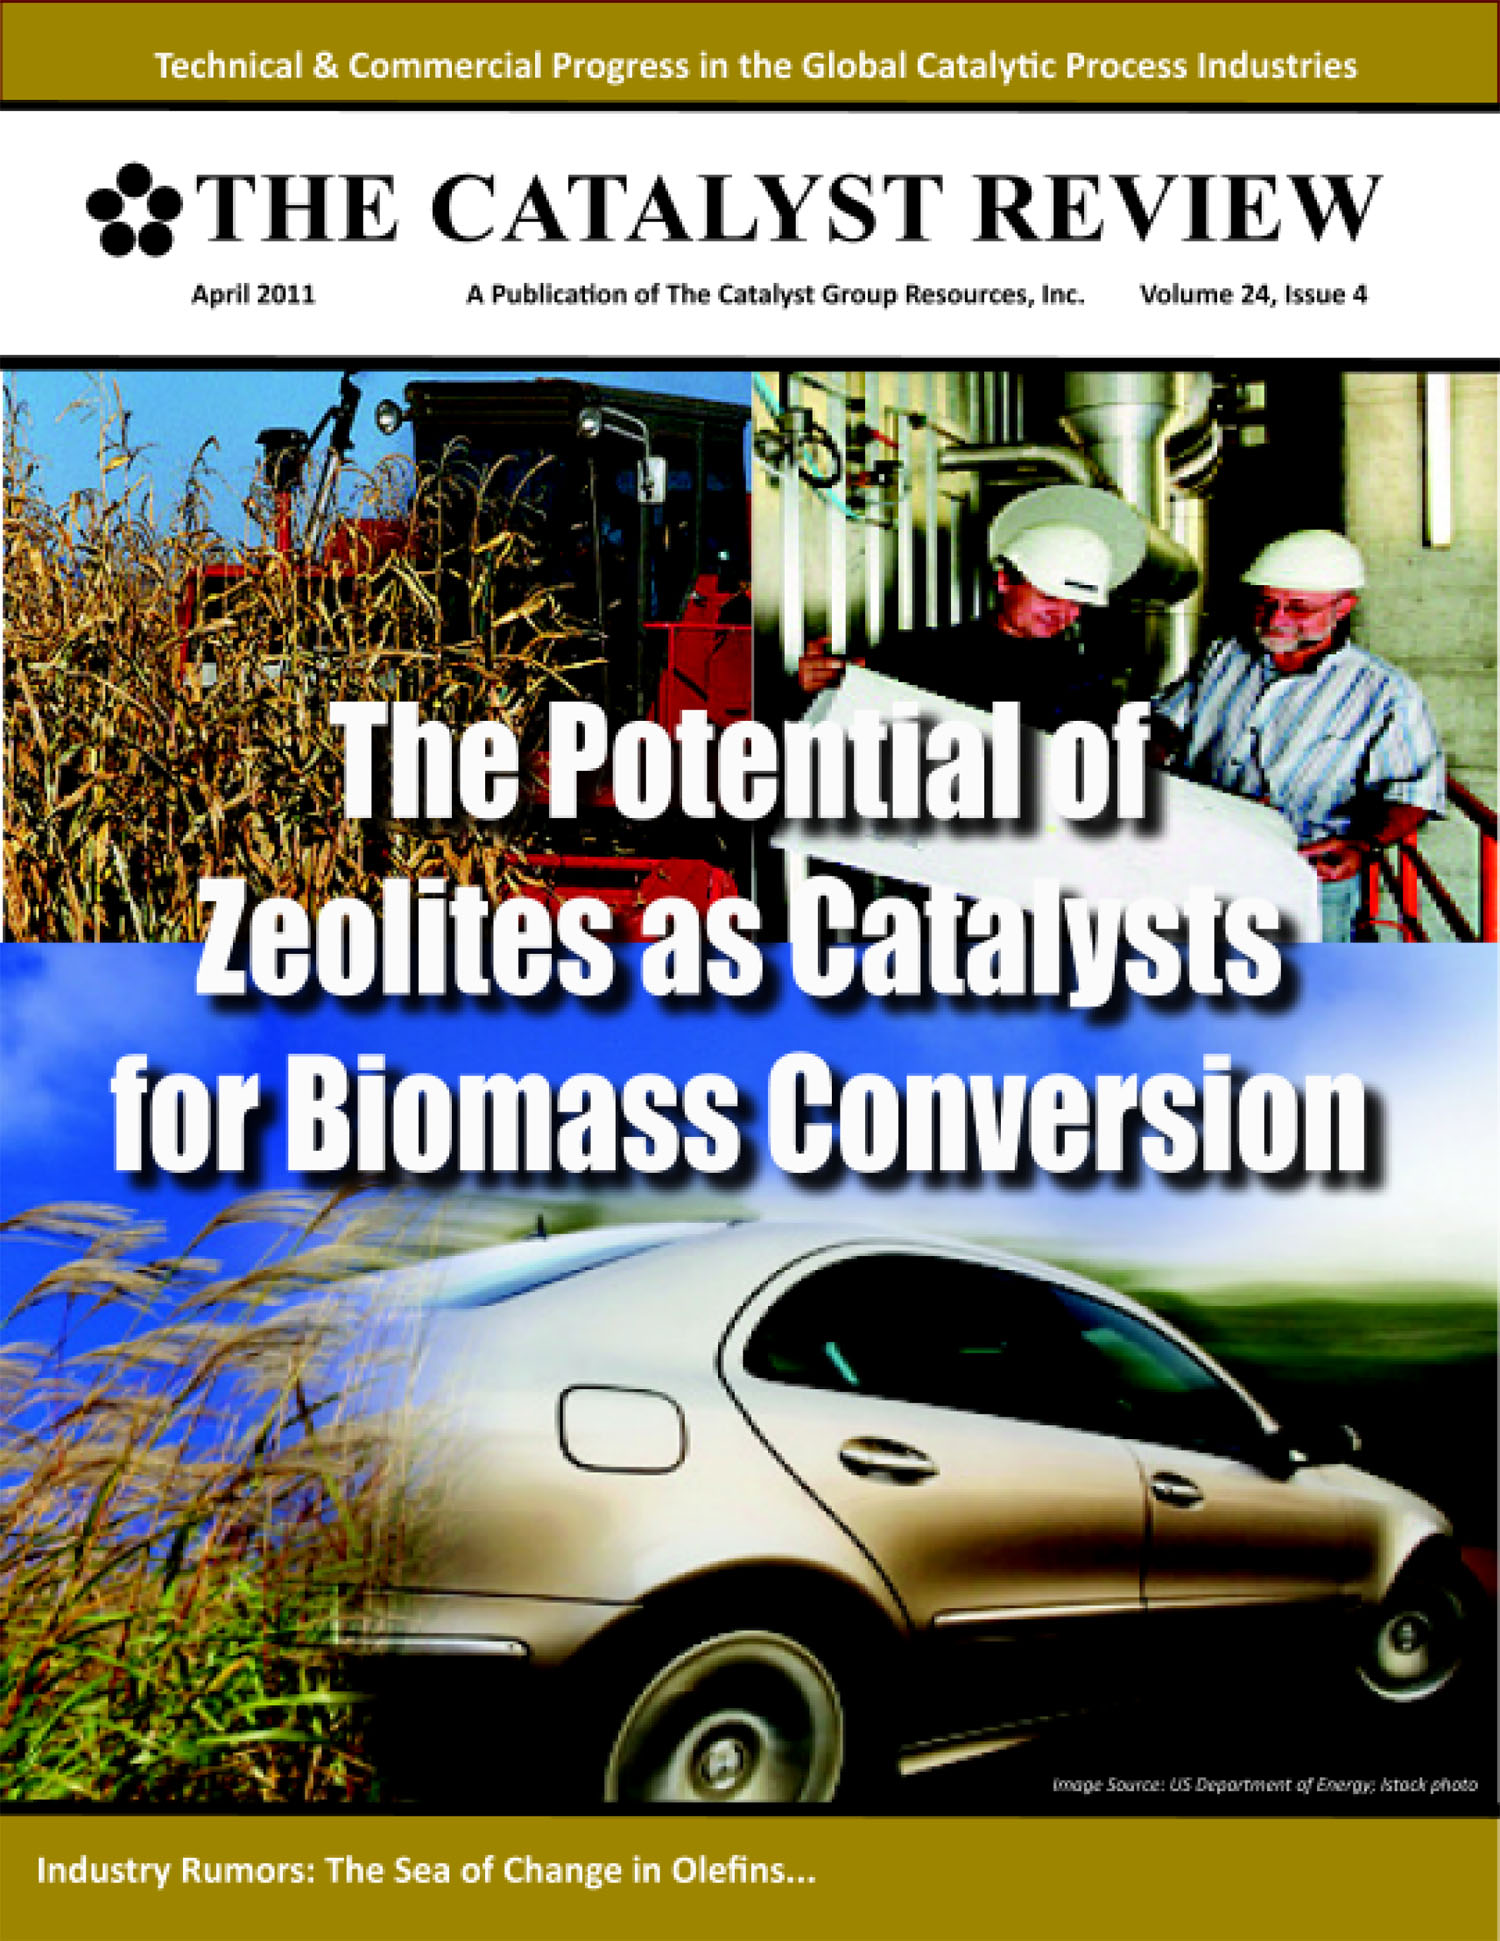 The Catalytic Review Feb. April 2011